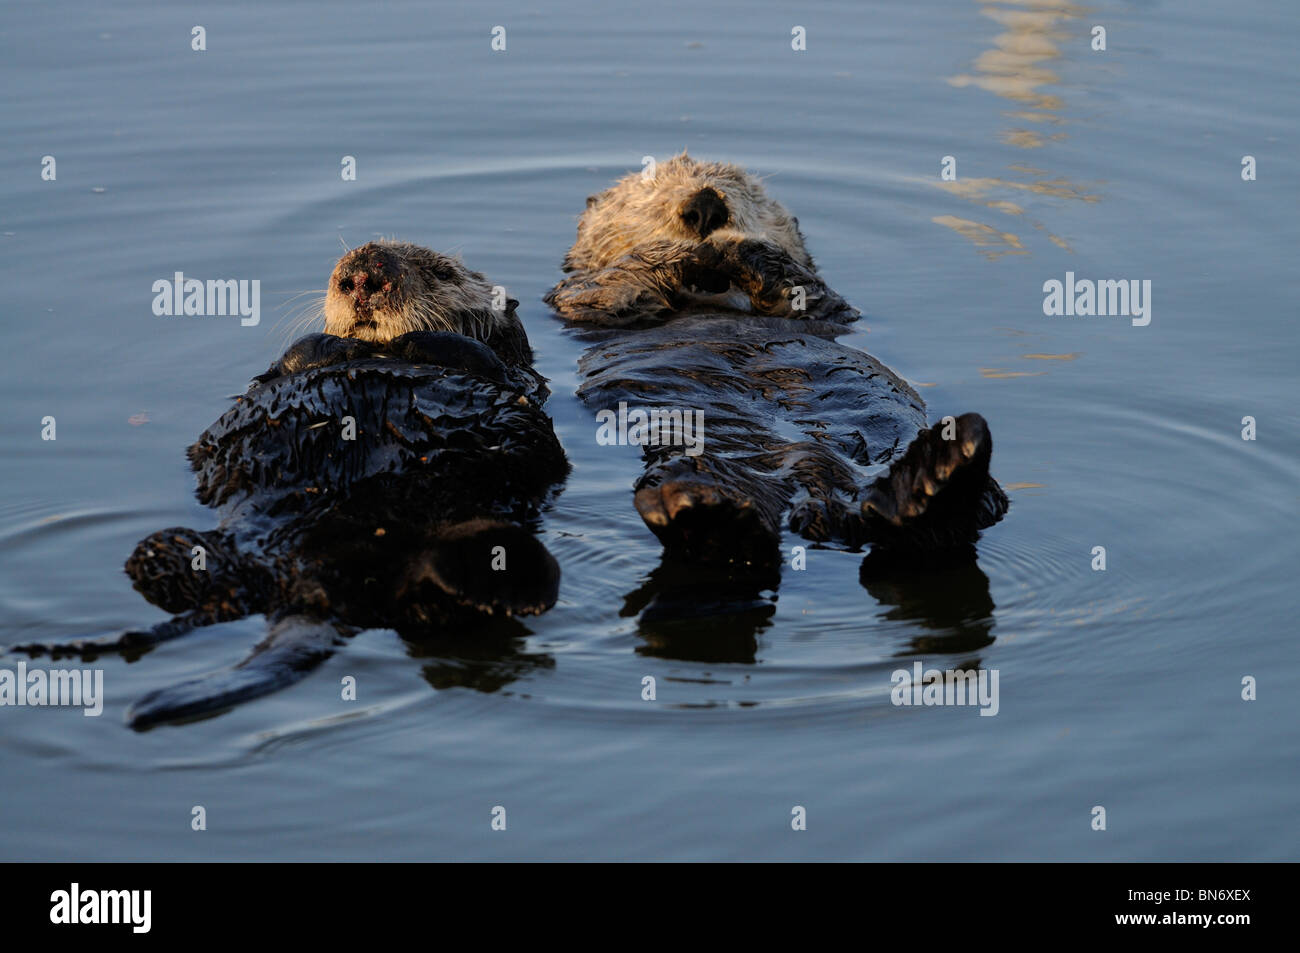 Stock photo of a breeding pair of California sea otters floating in the water on their backs. Stock Photo